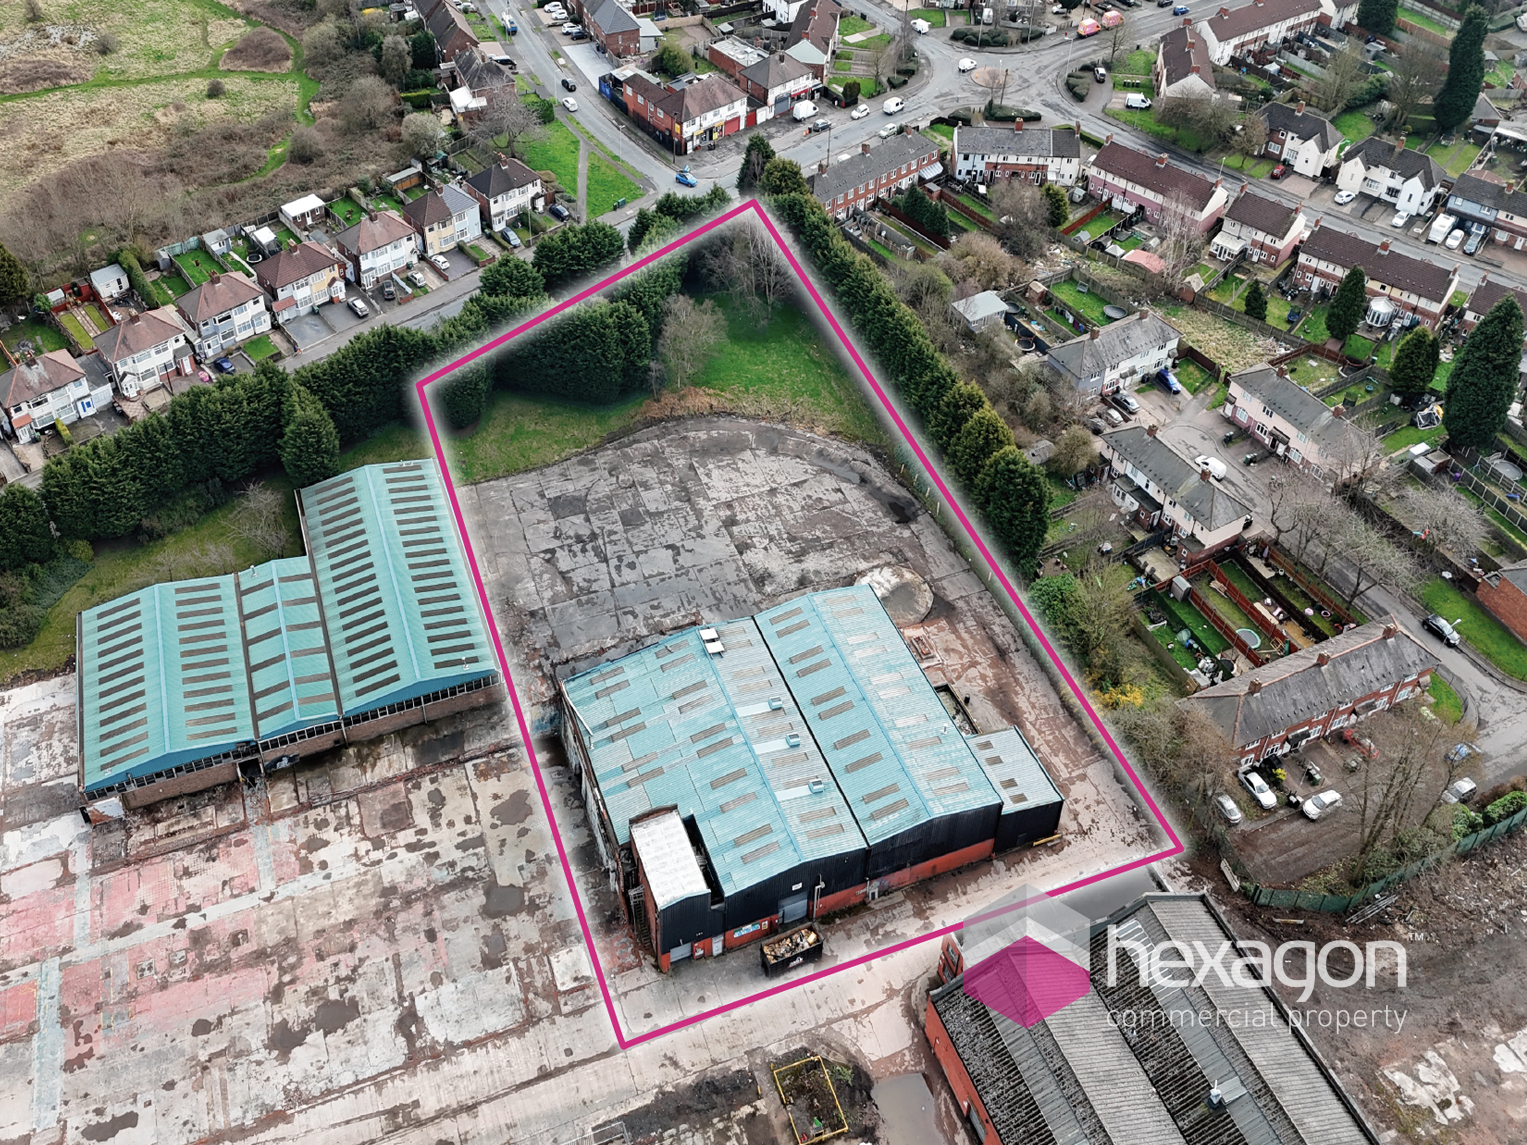 0 bed Land (Commercial) for rent in Wolverhampton. From Hexagon Commercial Property